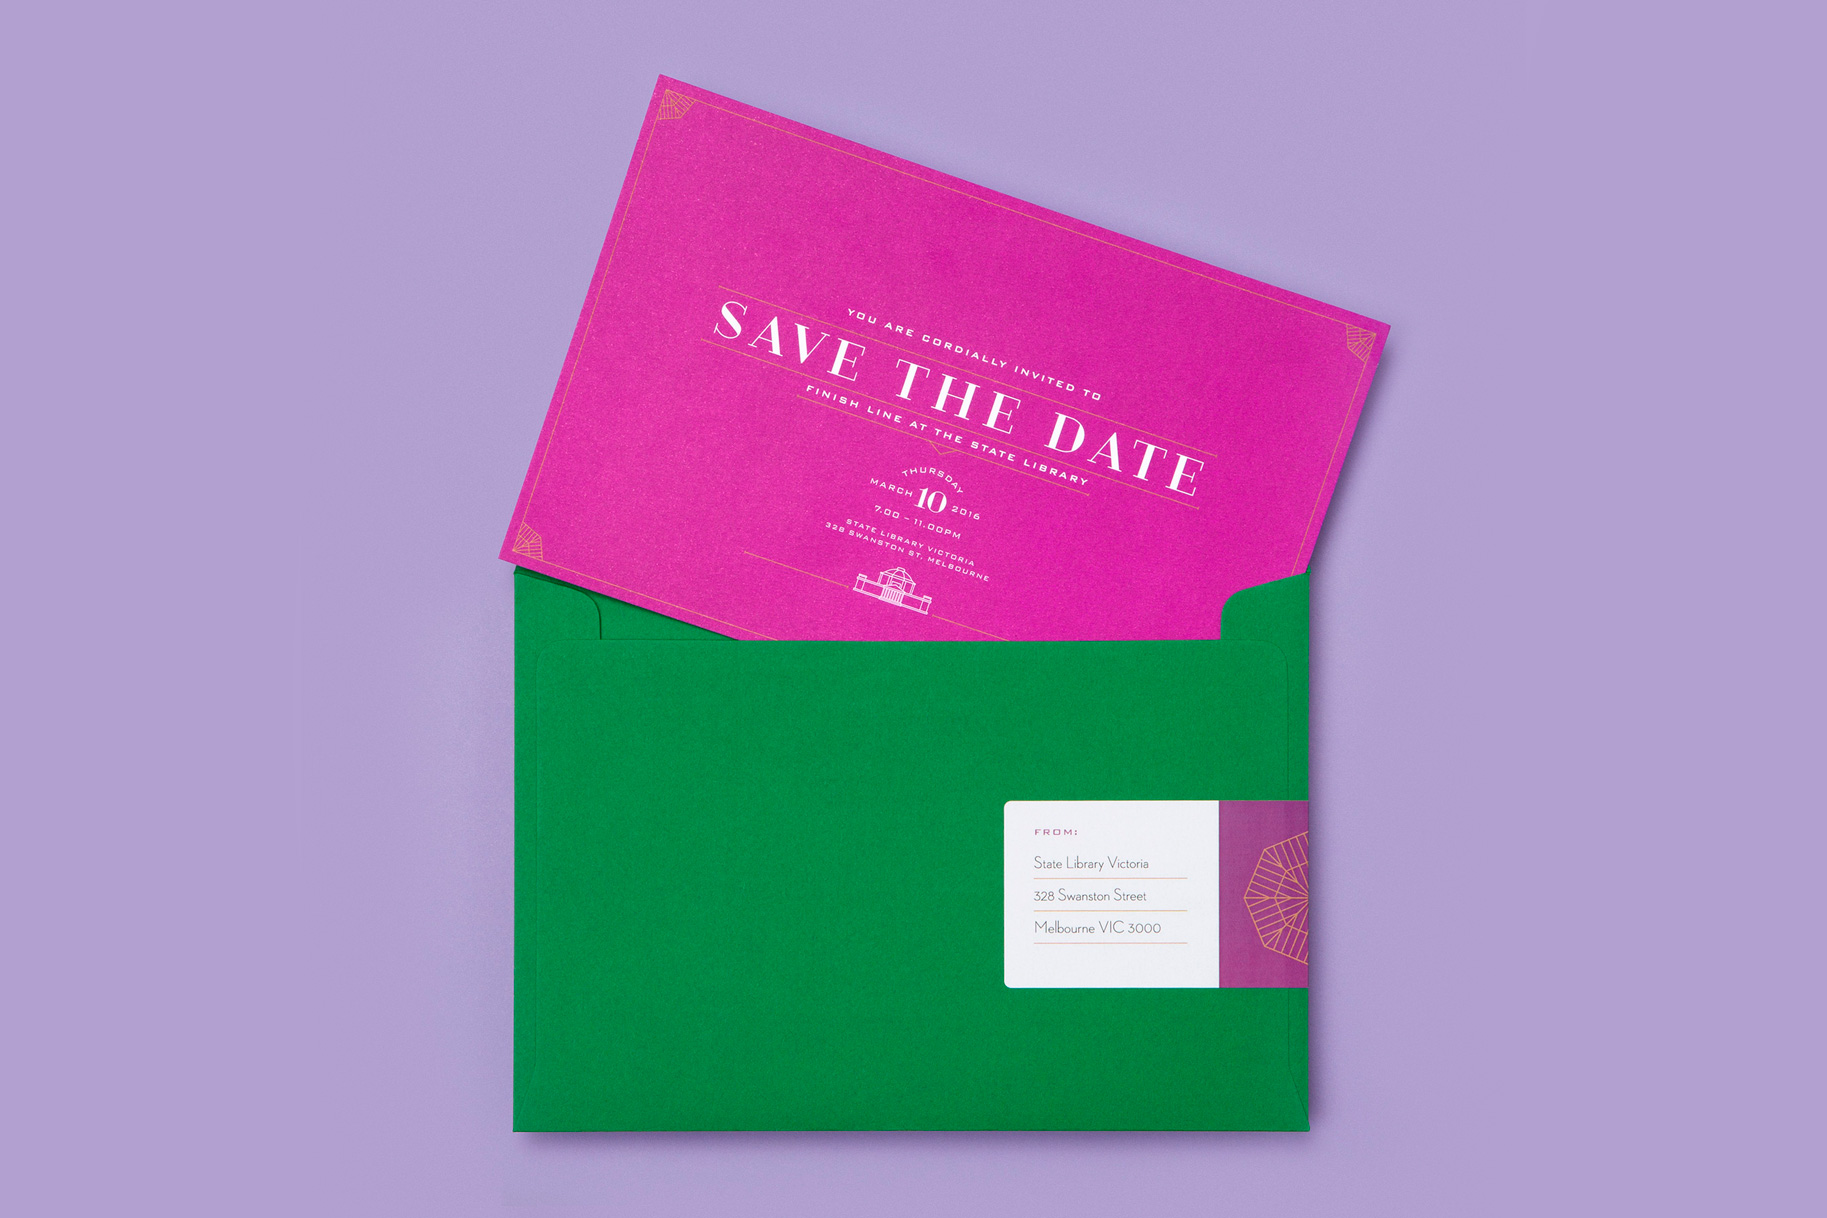 Finish Line magenta-coloured invitation, sitting on a racing-green envelope